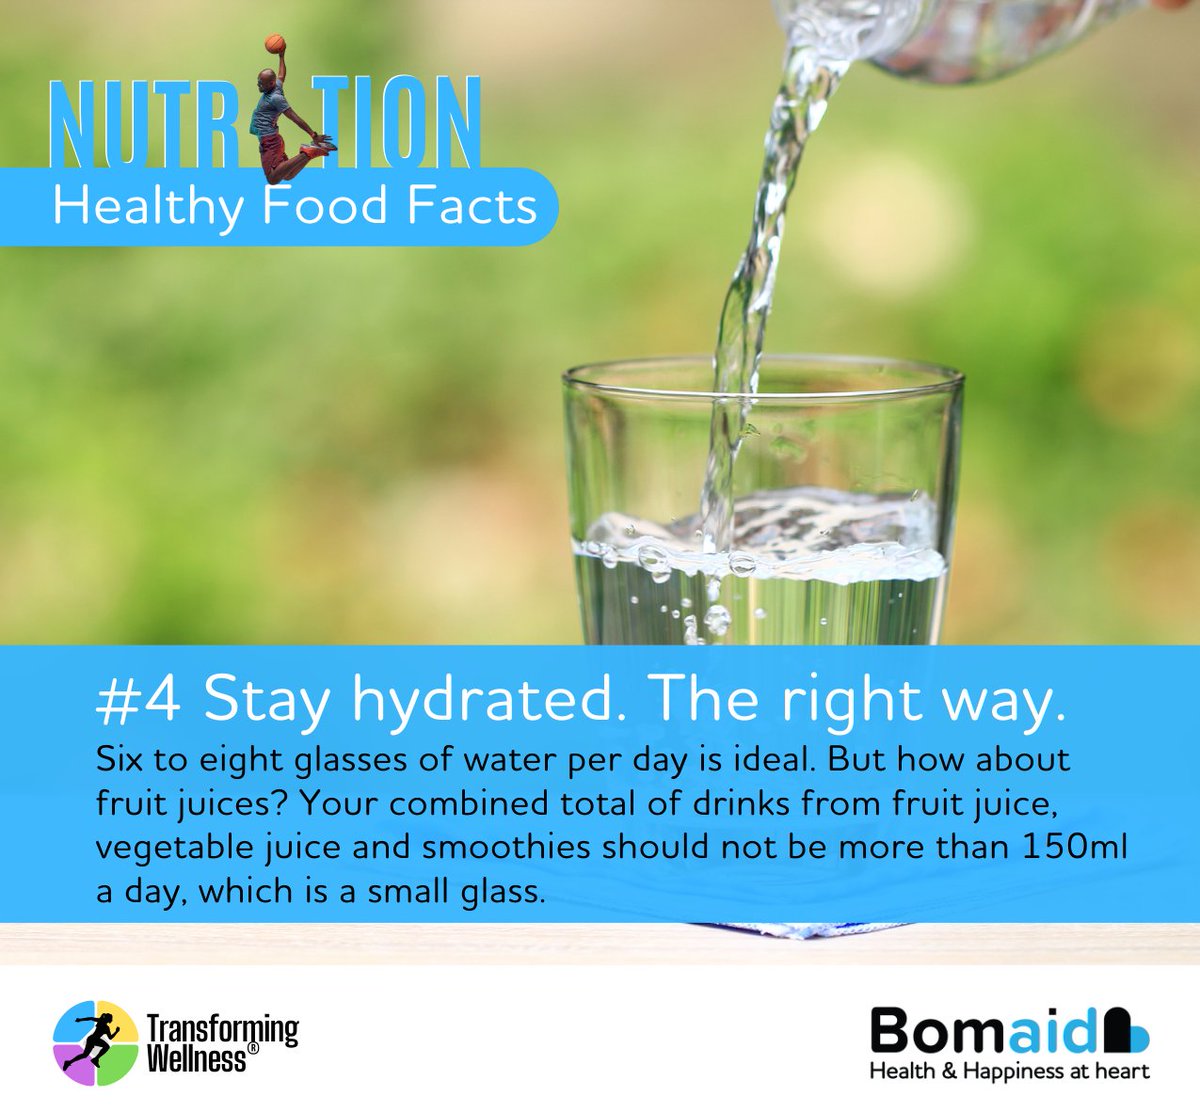 #HealthyFoodFacts
Whilst juice might be tastier than water, increased consumption of it can lead to decayed teeth and a rise in sugar levels. So, lower the juice intake and opt for healthier water instead.